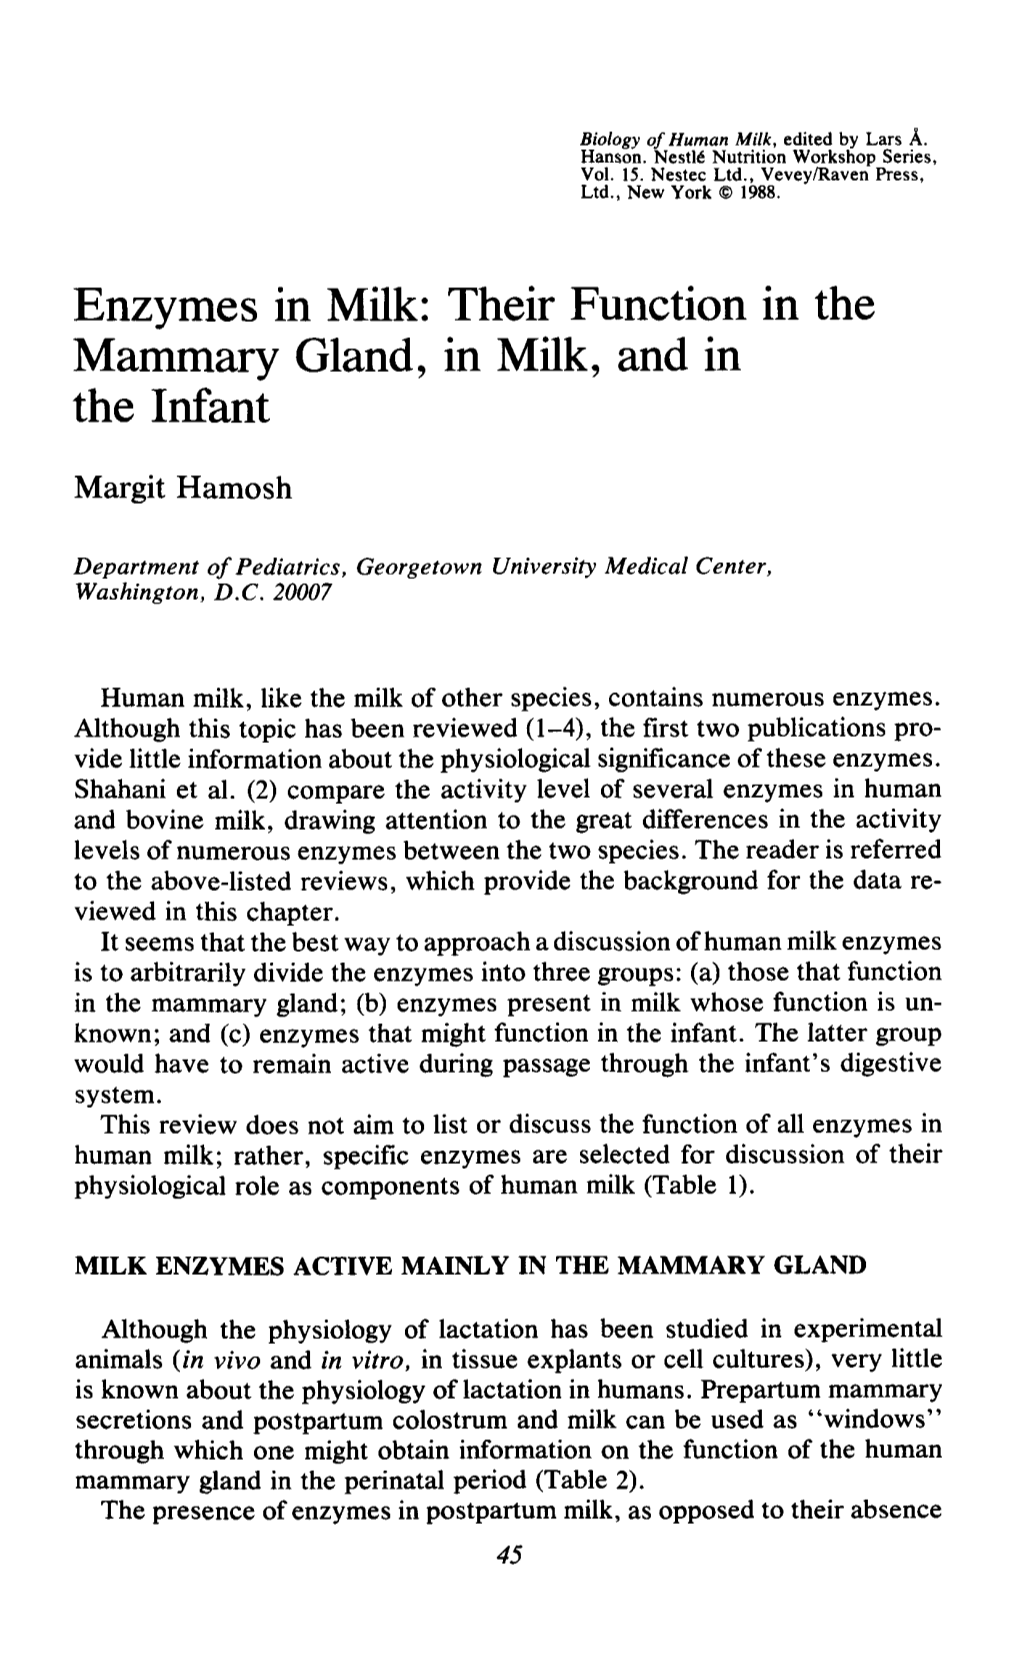 Enzymes in Milk: Their Function in the Mammary Gland, in Milk, and in the Infant